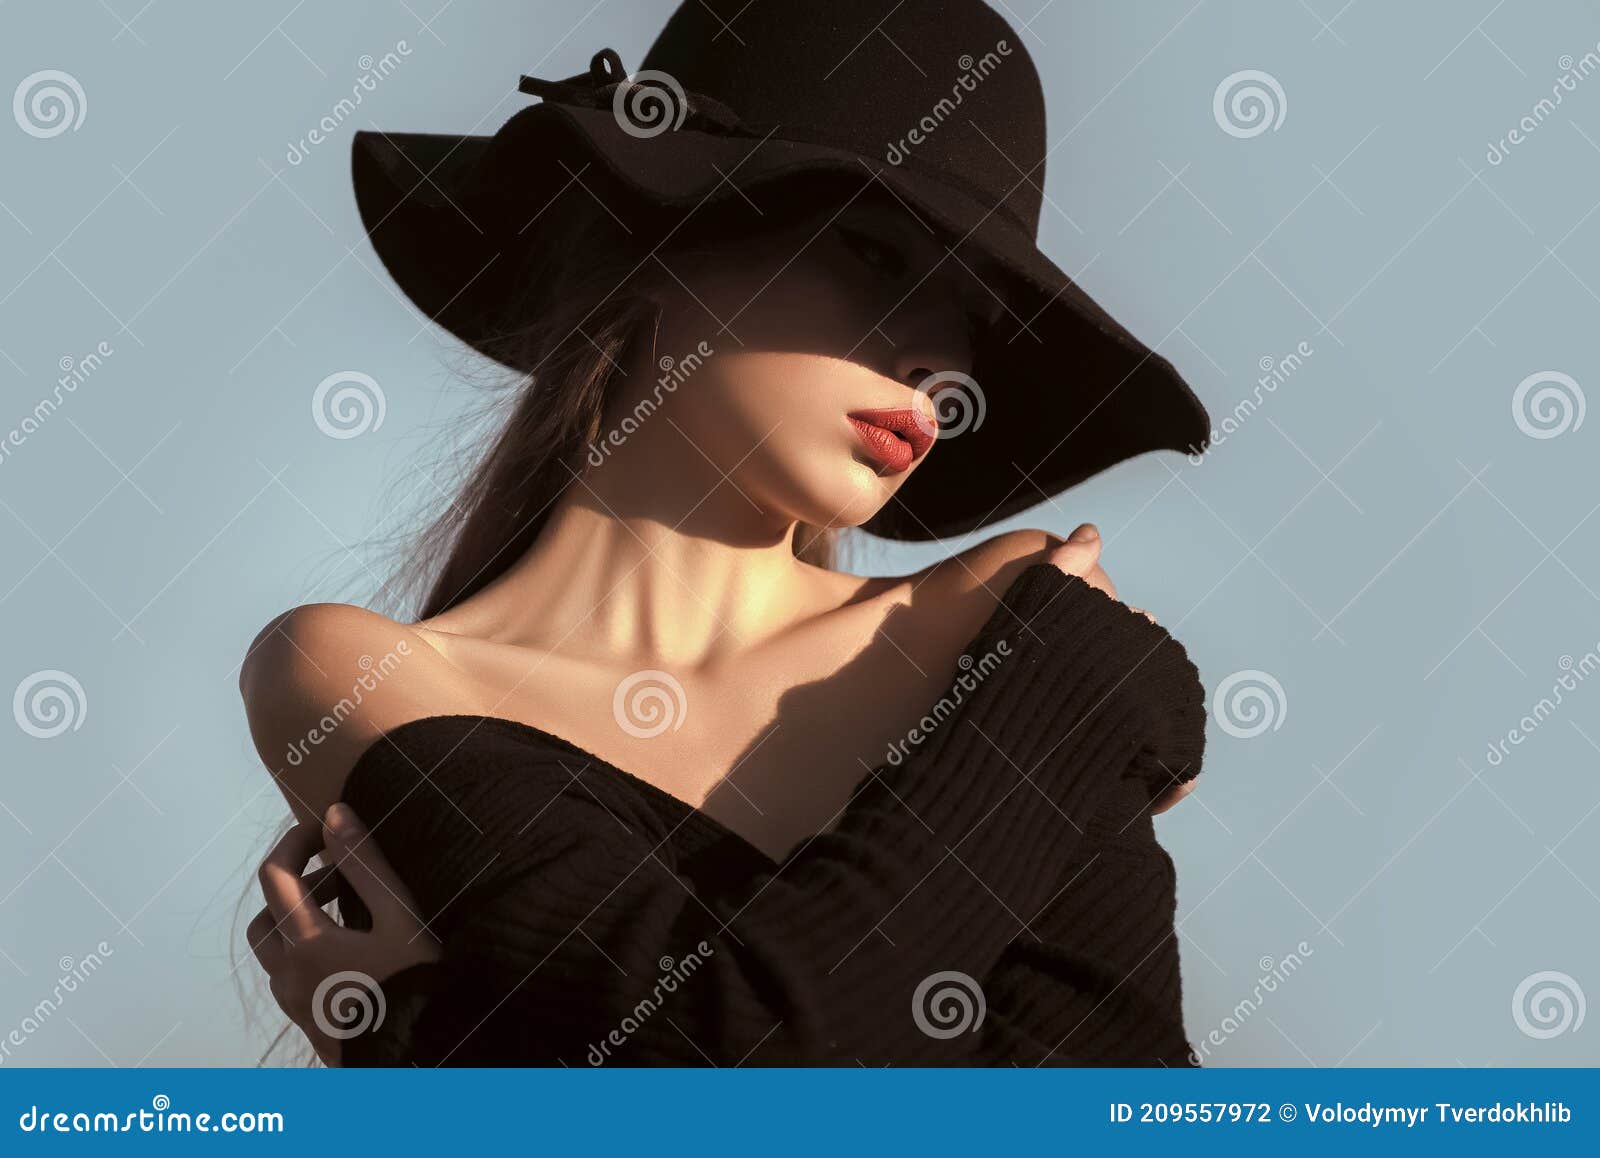 Portrait Of Tempting Blonde In A Hat Stock Image - Image 